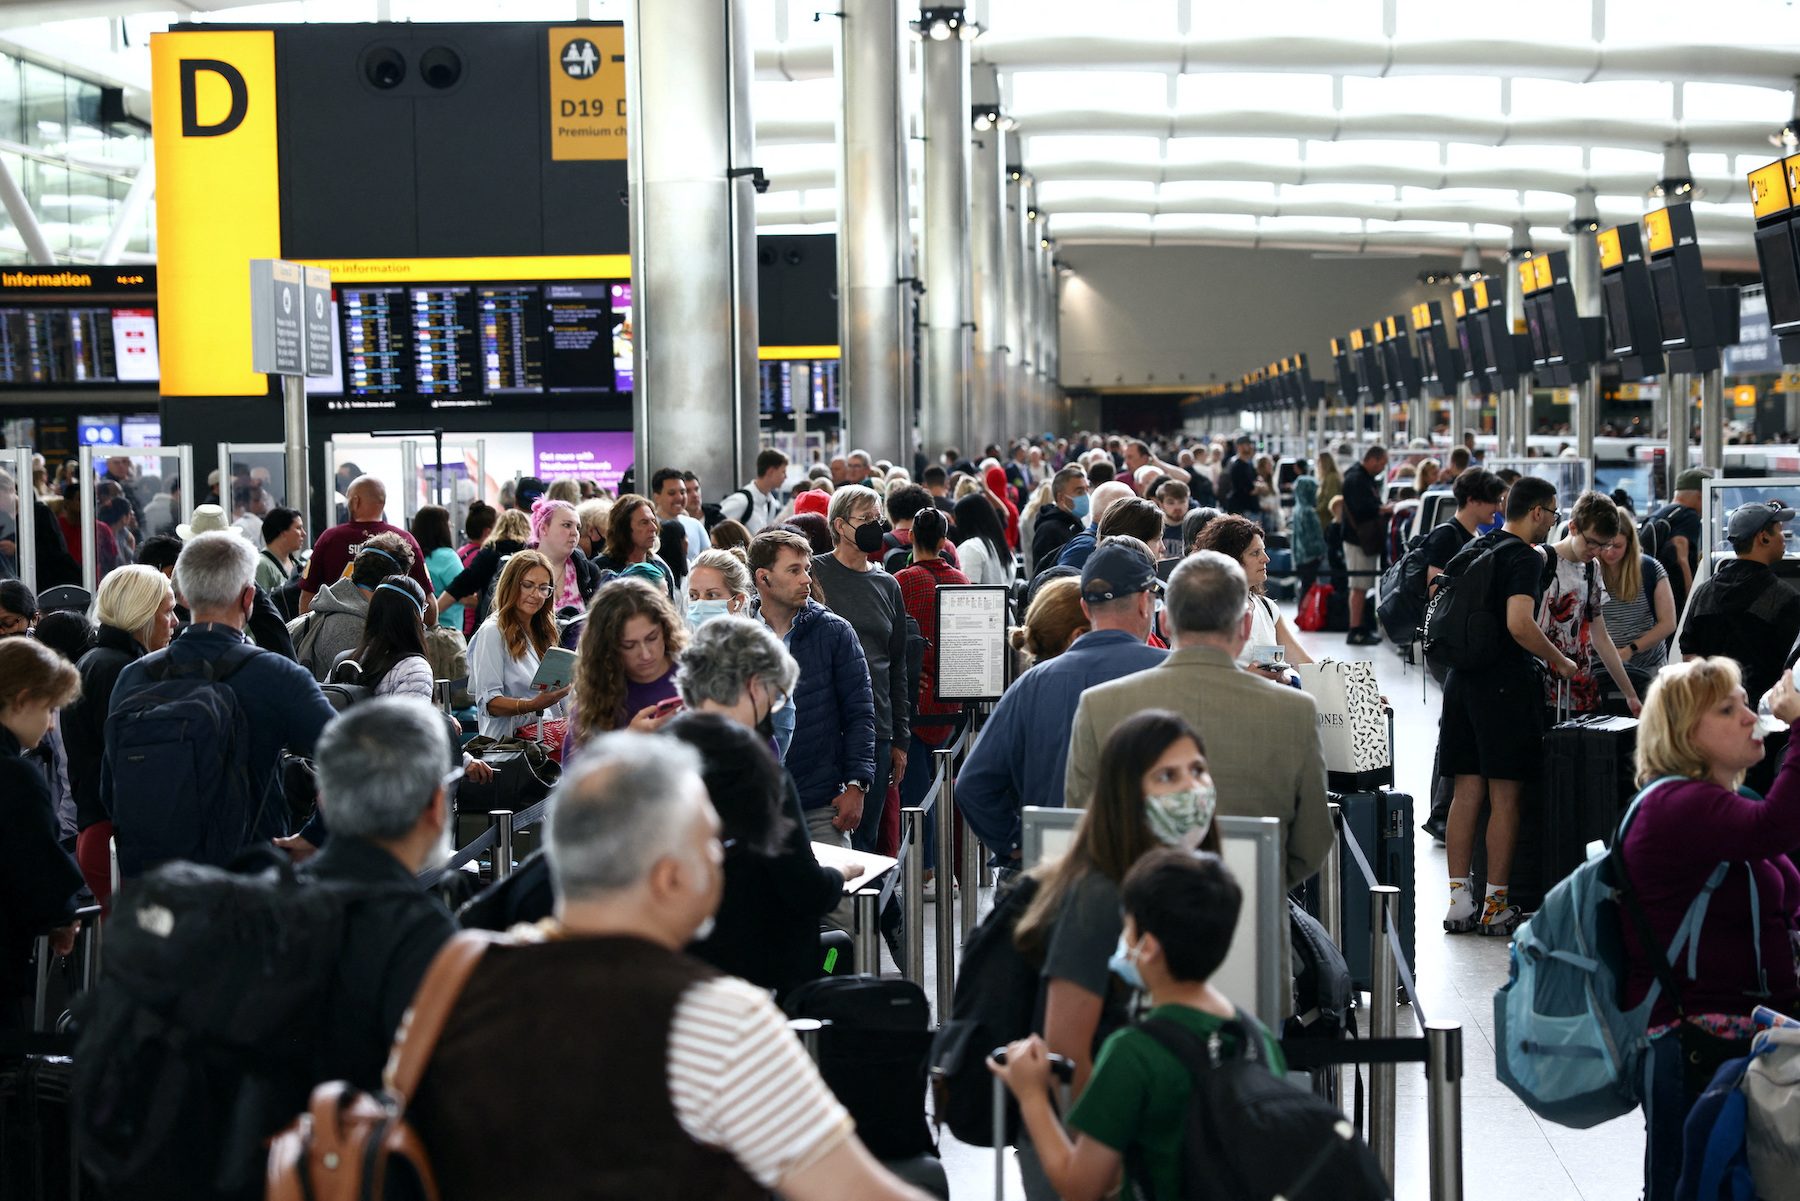 London's Heathrow airport caps departing passengers at 100,000 a day